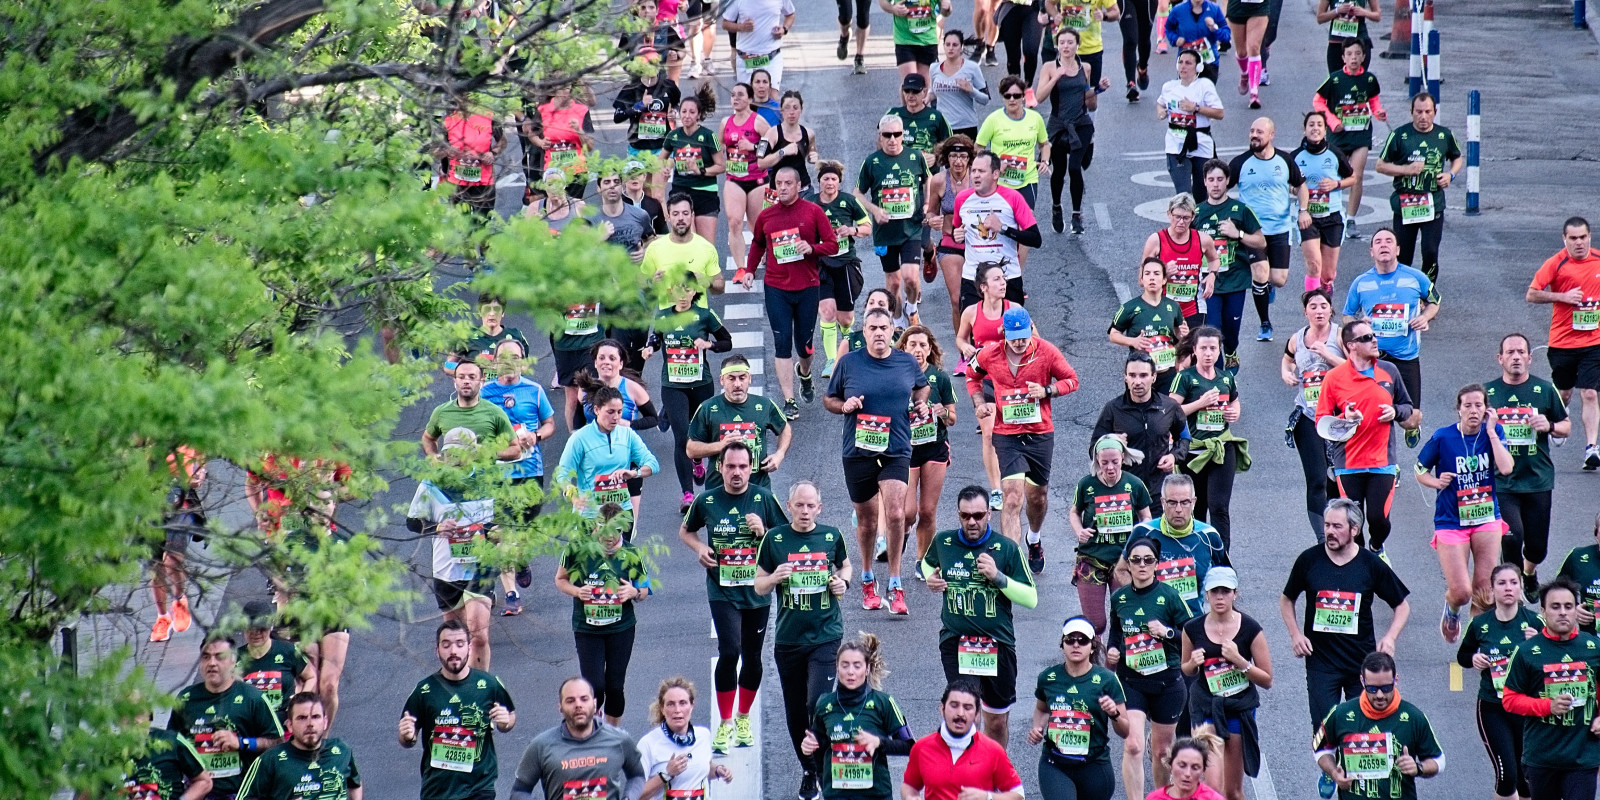 Runners taking part in mass marathon event Photo by Miguel A. Amutio on Unsplash